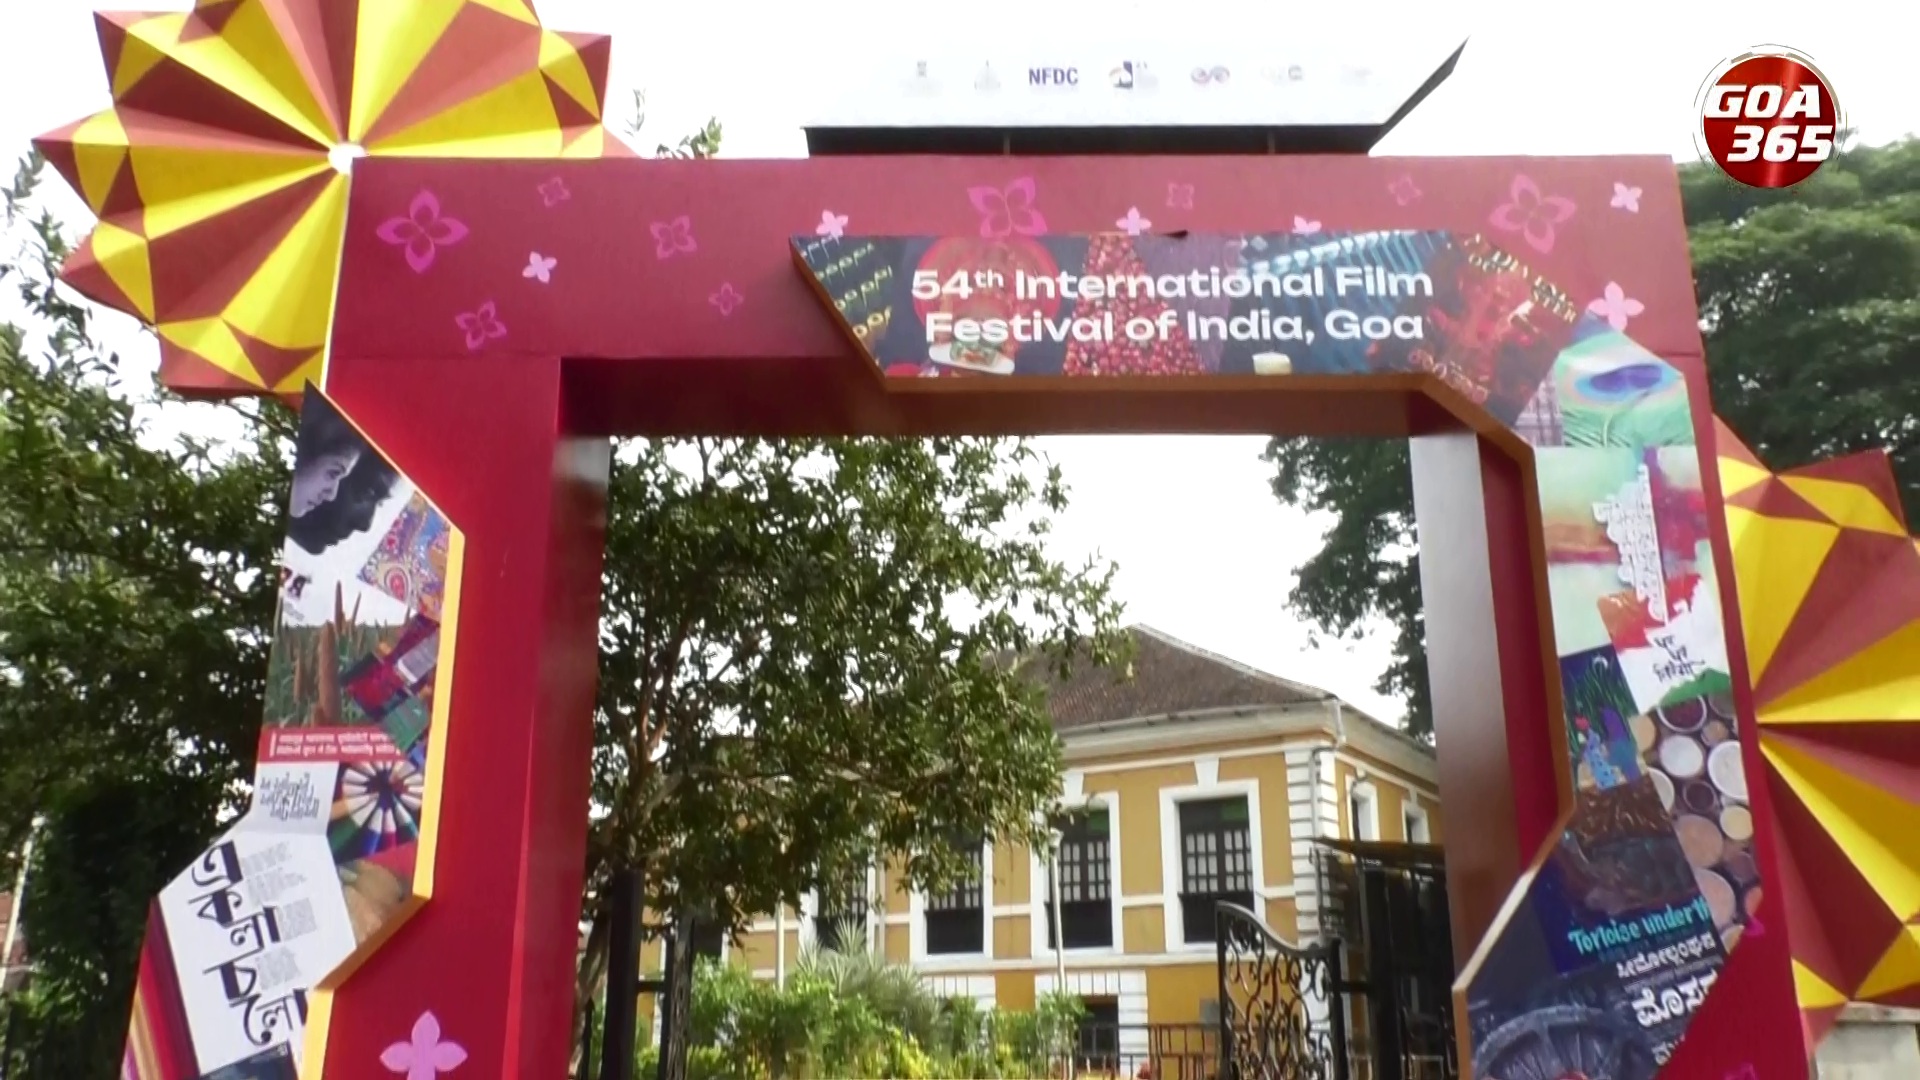 More screens! More Venues! IFFI prep in full swing as opening day nears || ENGLISH || GOA365